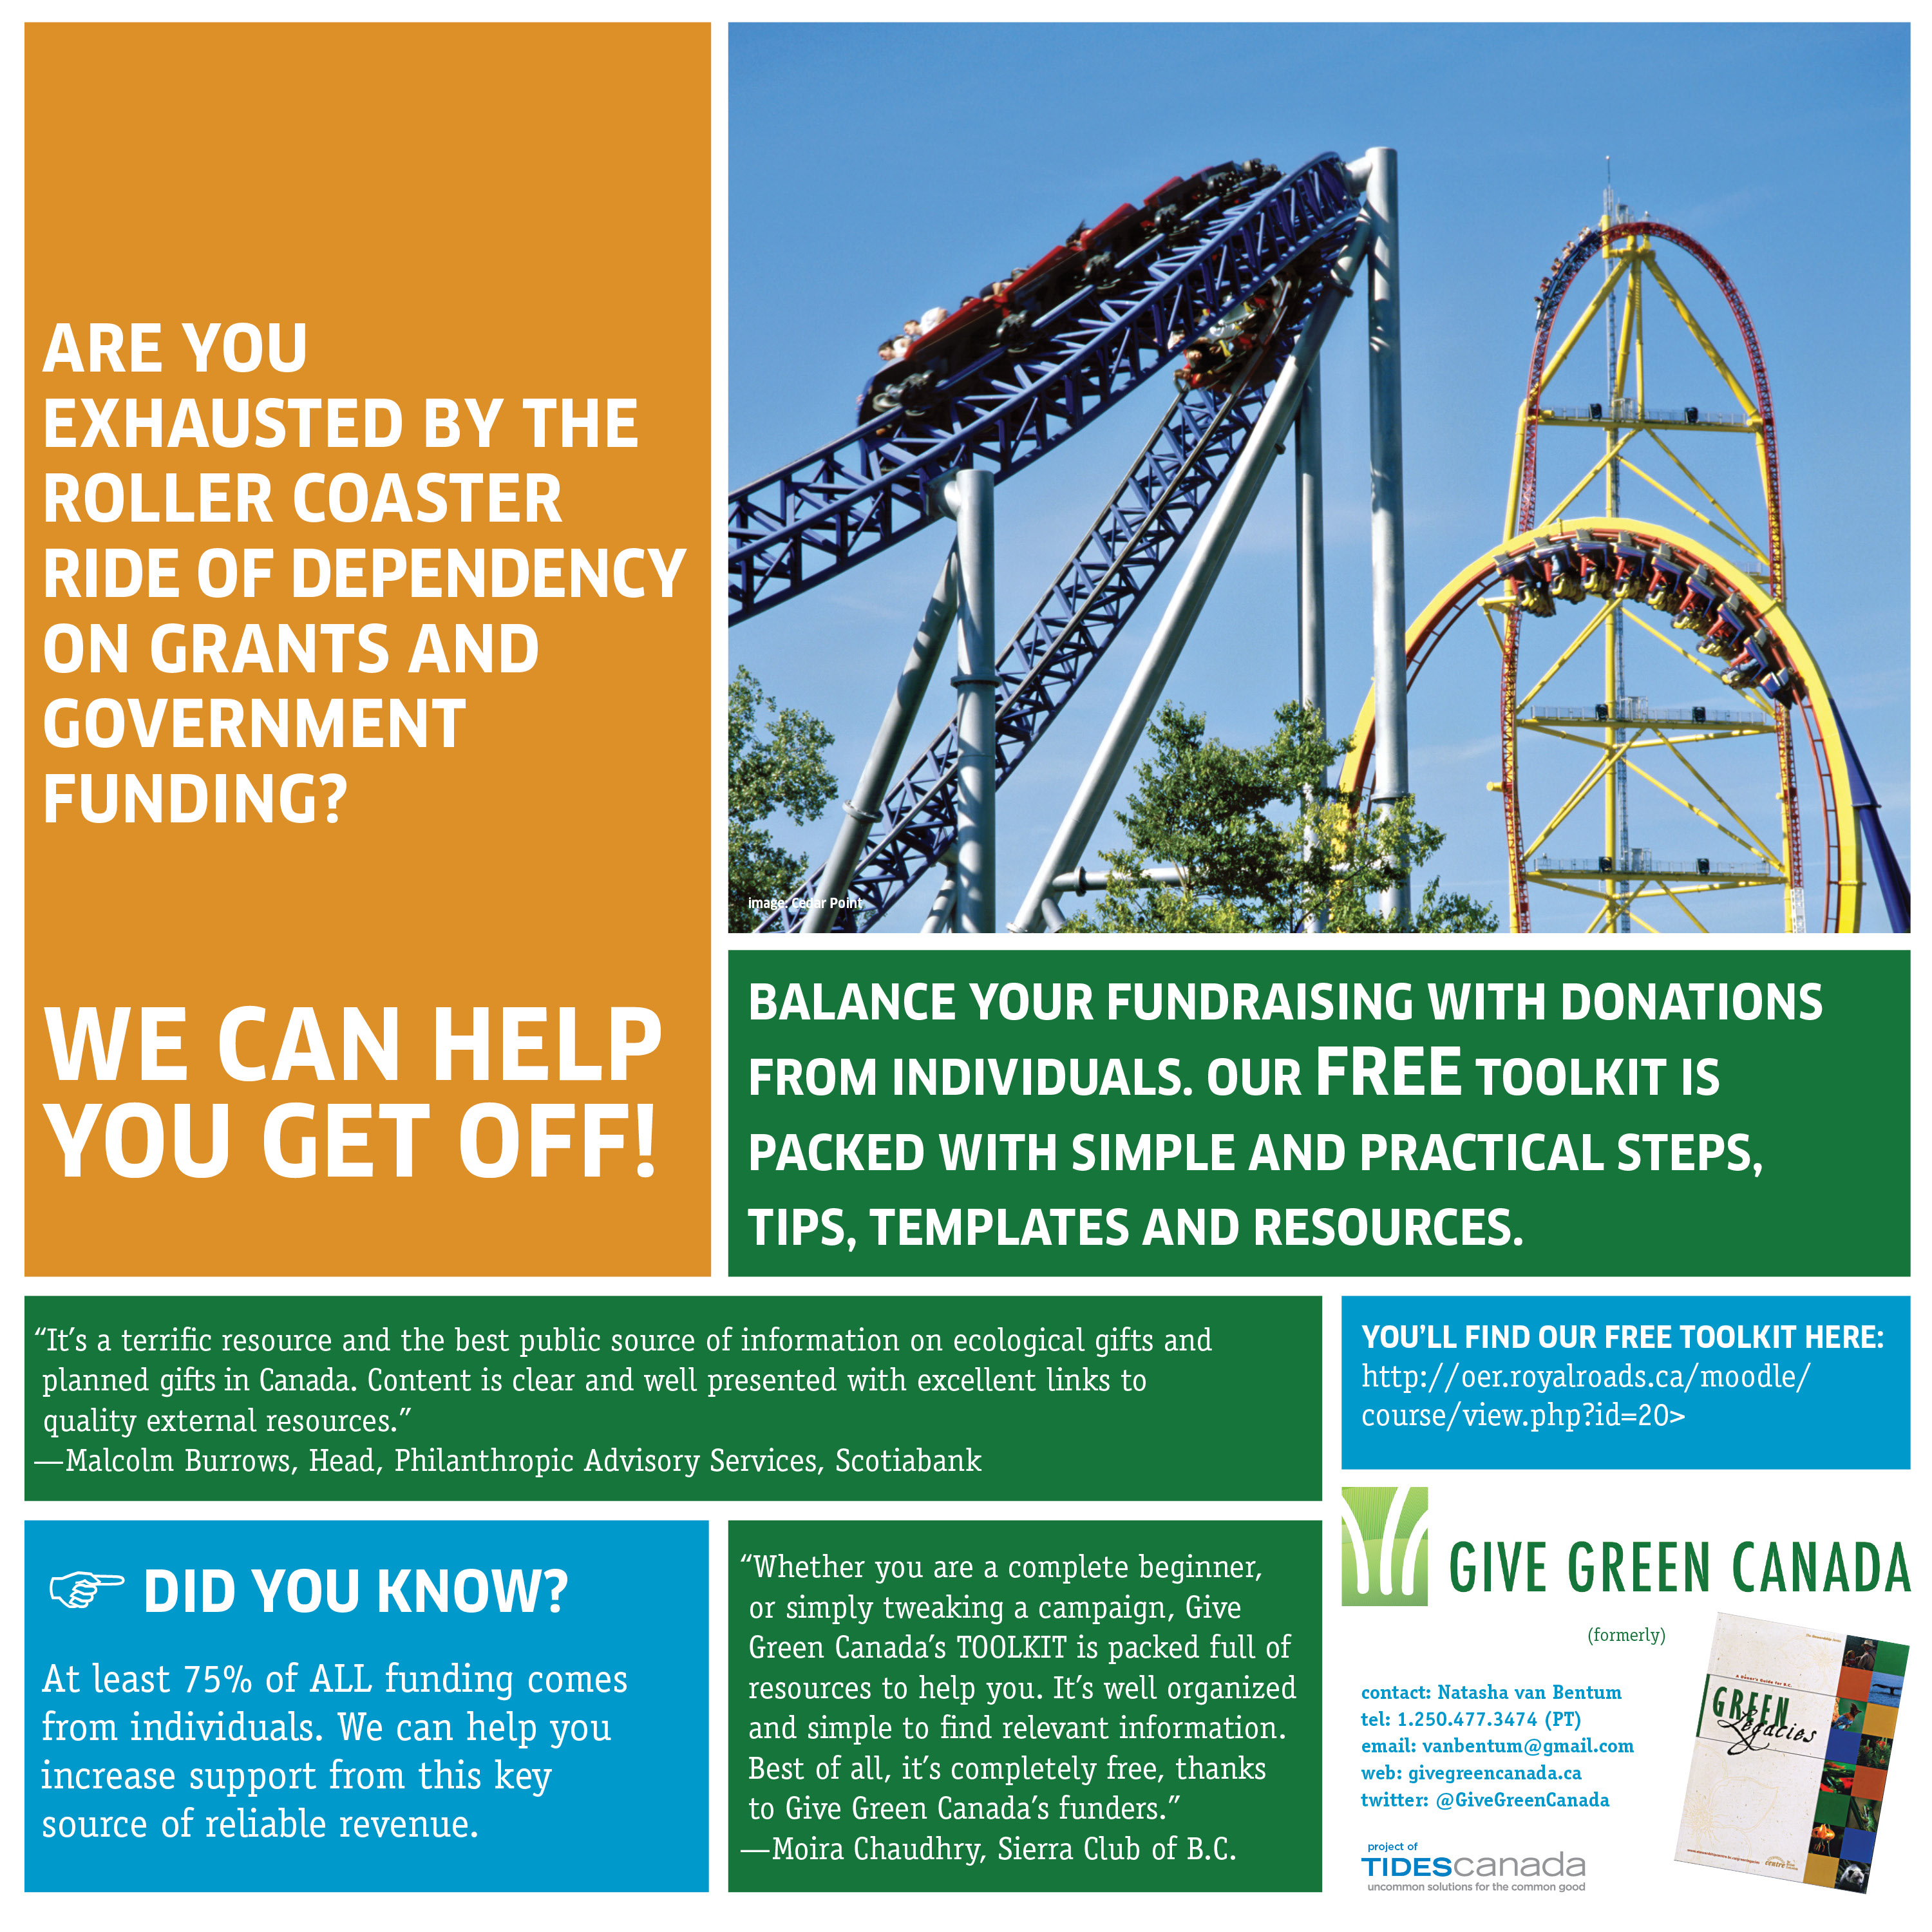 Give Green Canada: Check out our Roller Coaster ad